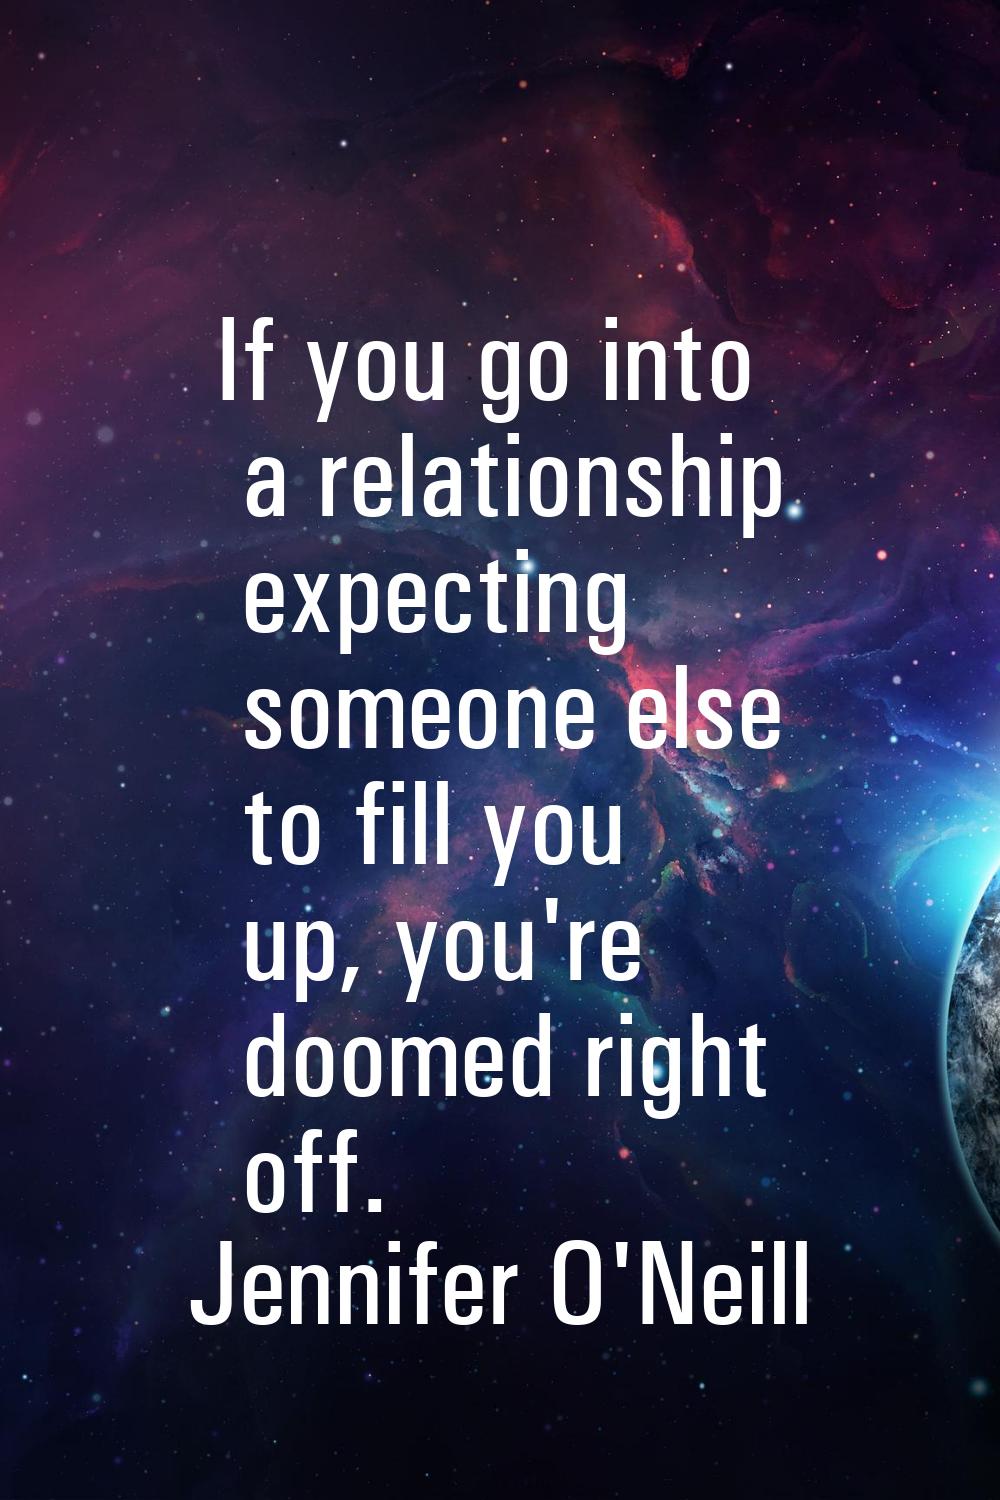 If you go into a relationship expecting someone else to fill you up, you're doomed right off.